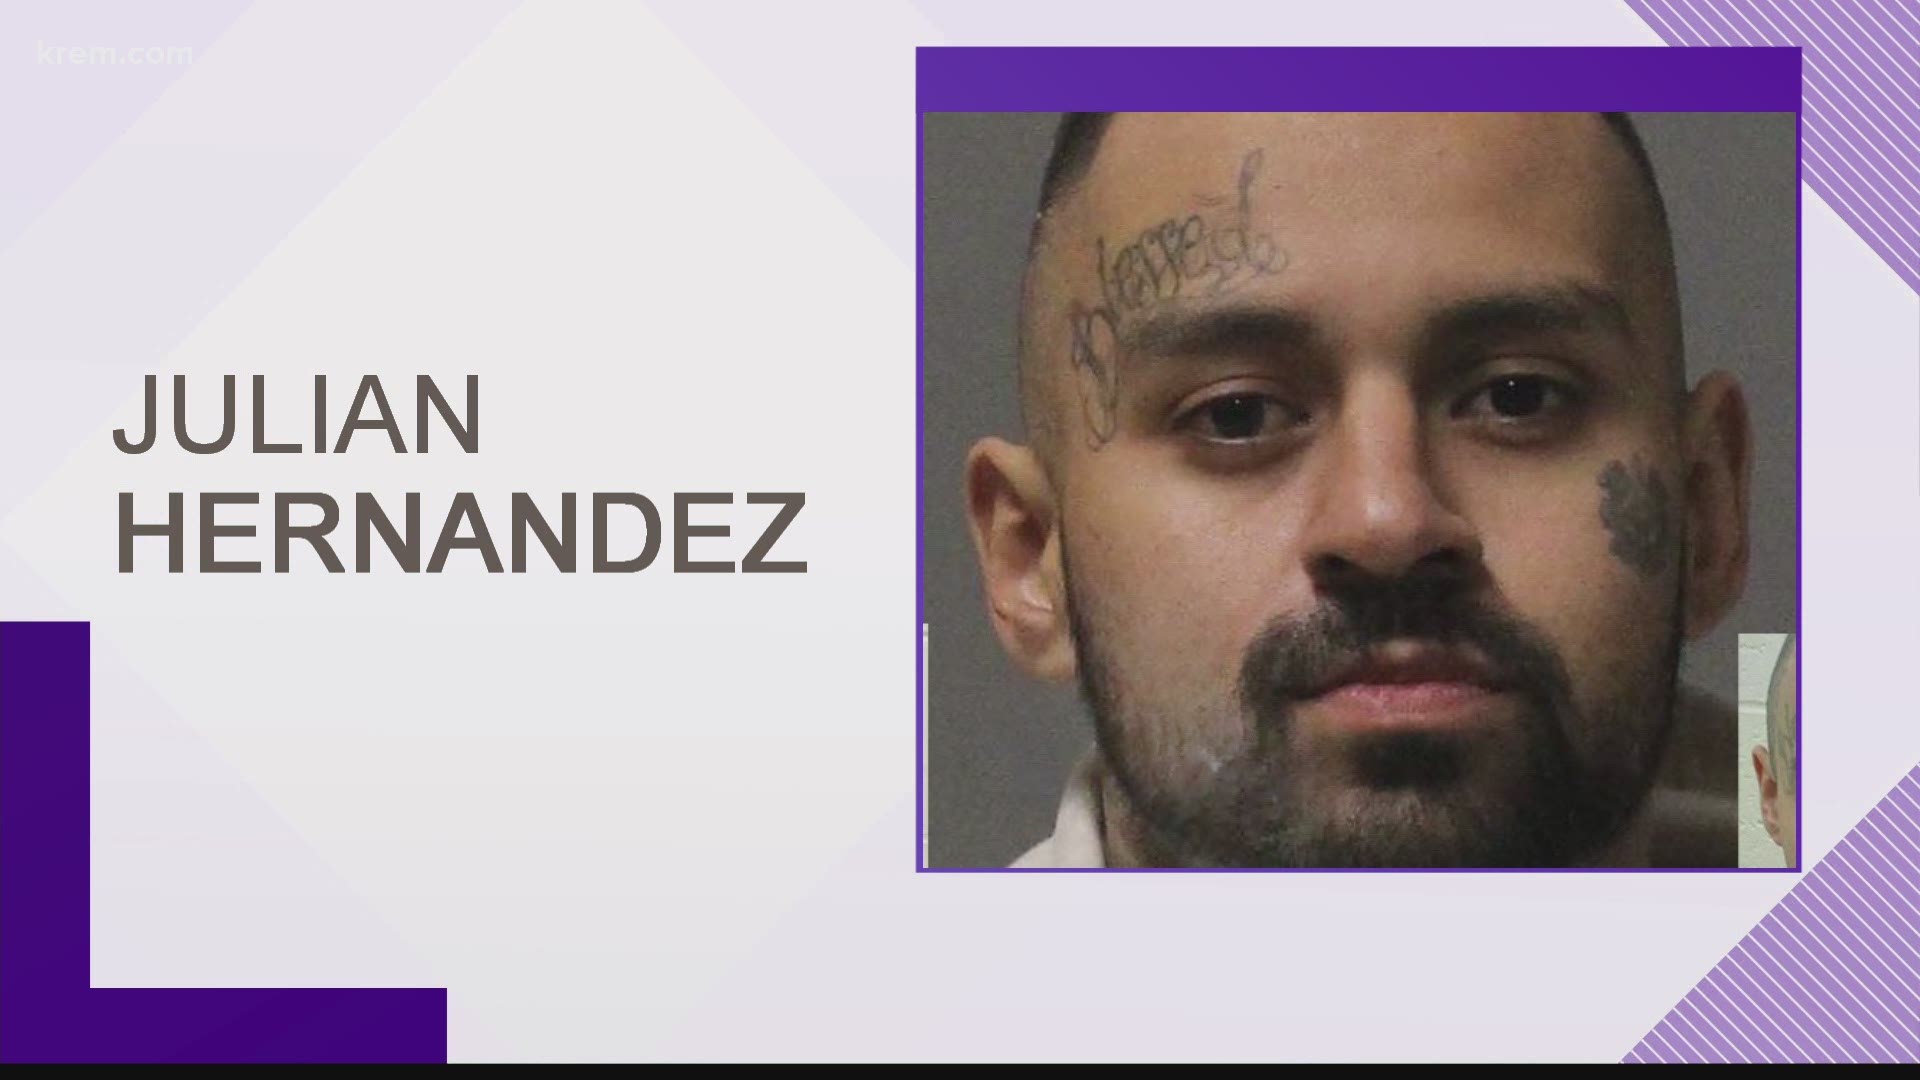 The situation started out as a wellness check. When deputies contacted the suspect, later identified as 28-year-old Julian Hernandez, he lied about his name and fled